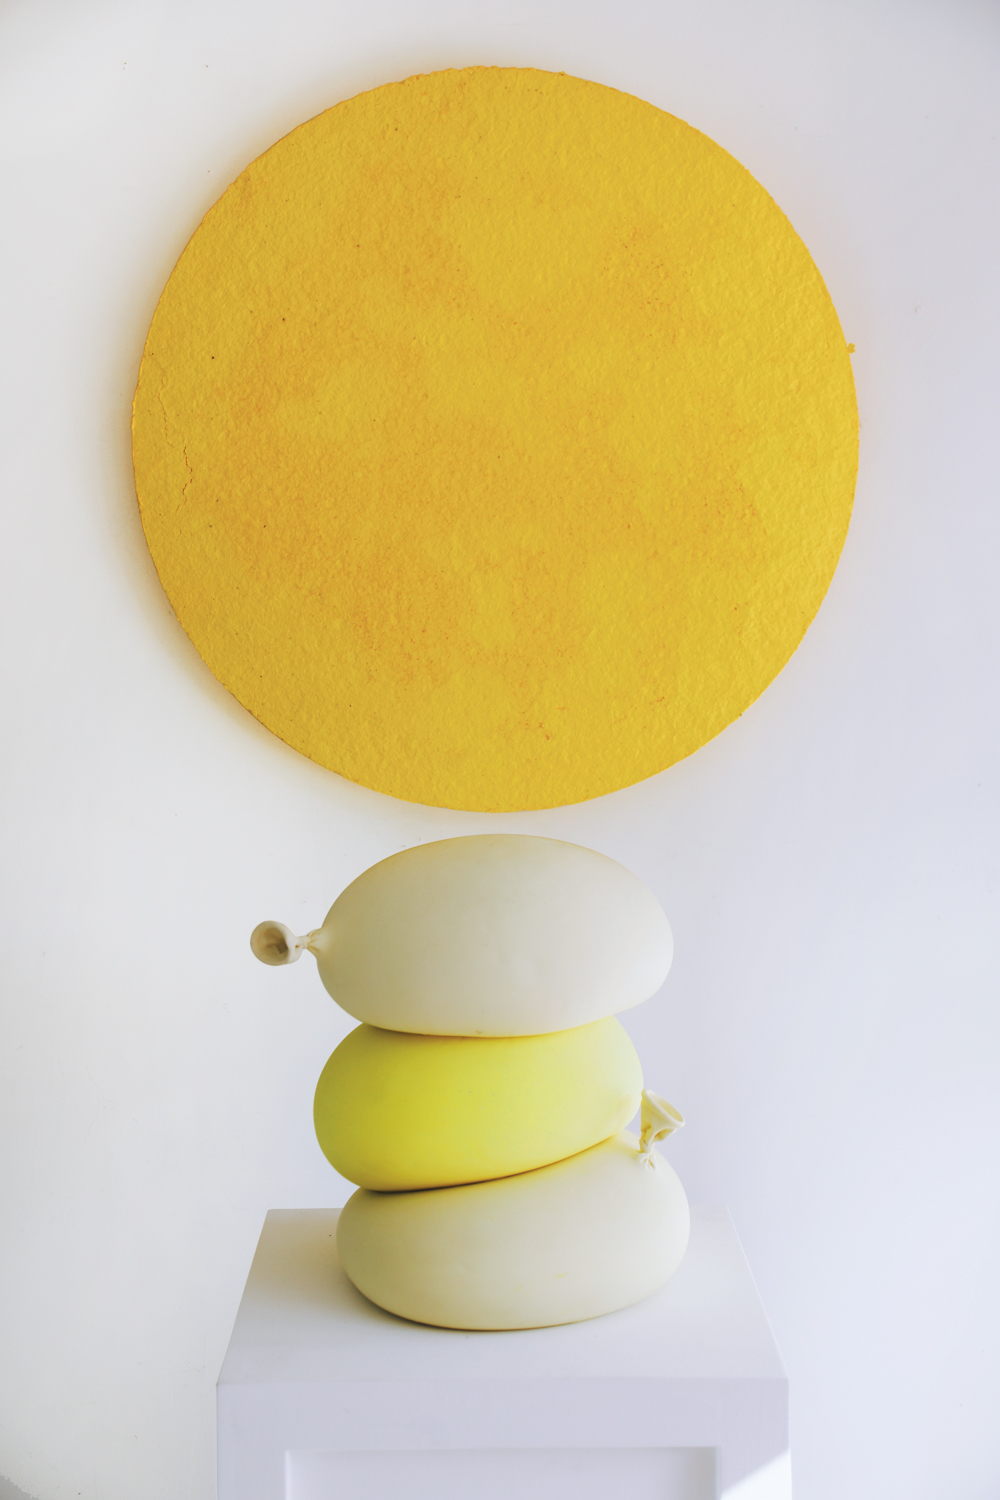 stack of yellow and white balloons in porcelain statue